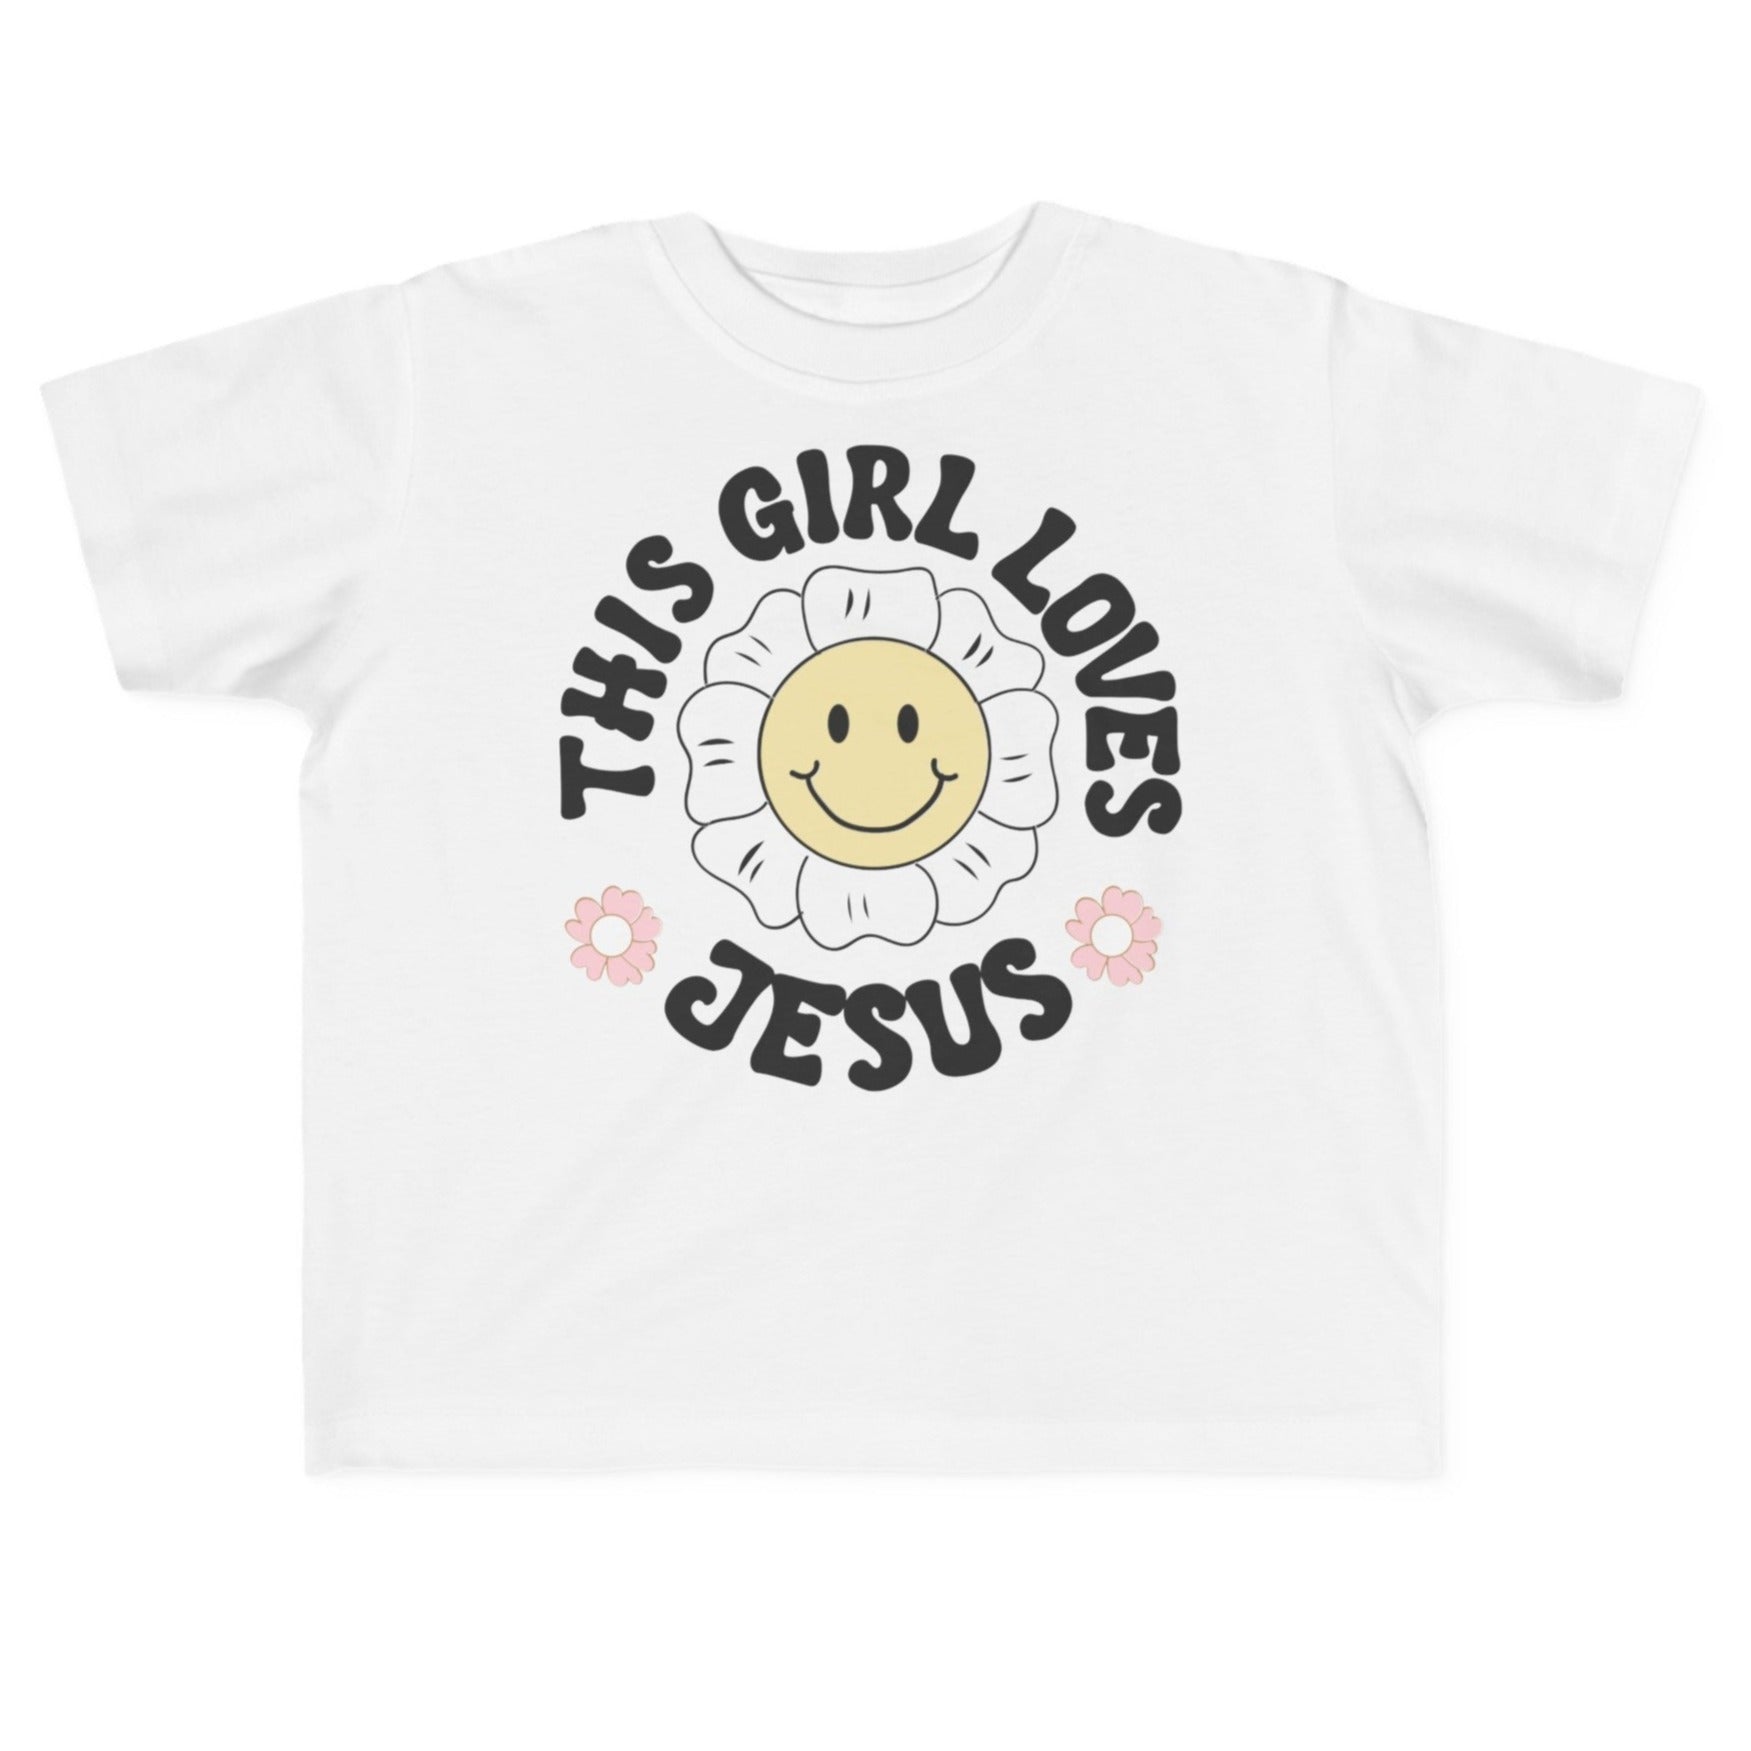 This Girl Loves Jesus Toddler's Fine Jersey Tee Color: White Size: 2T Jesus Passion Apparel